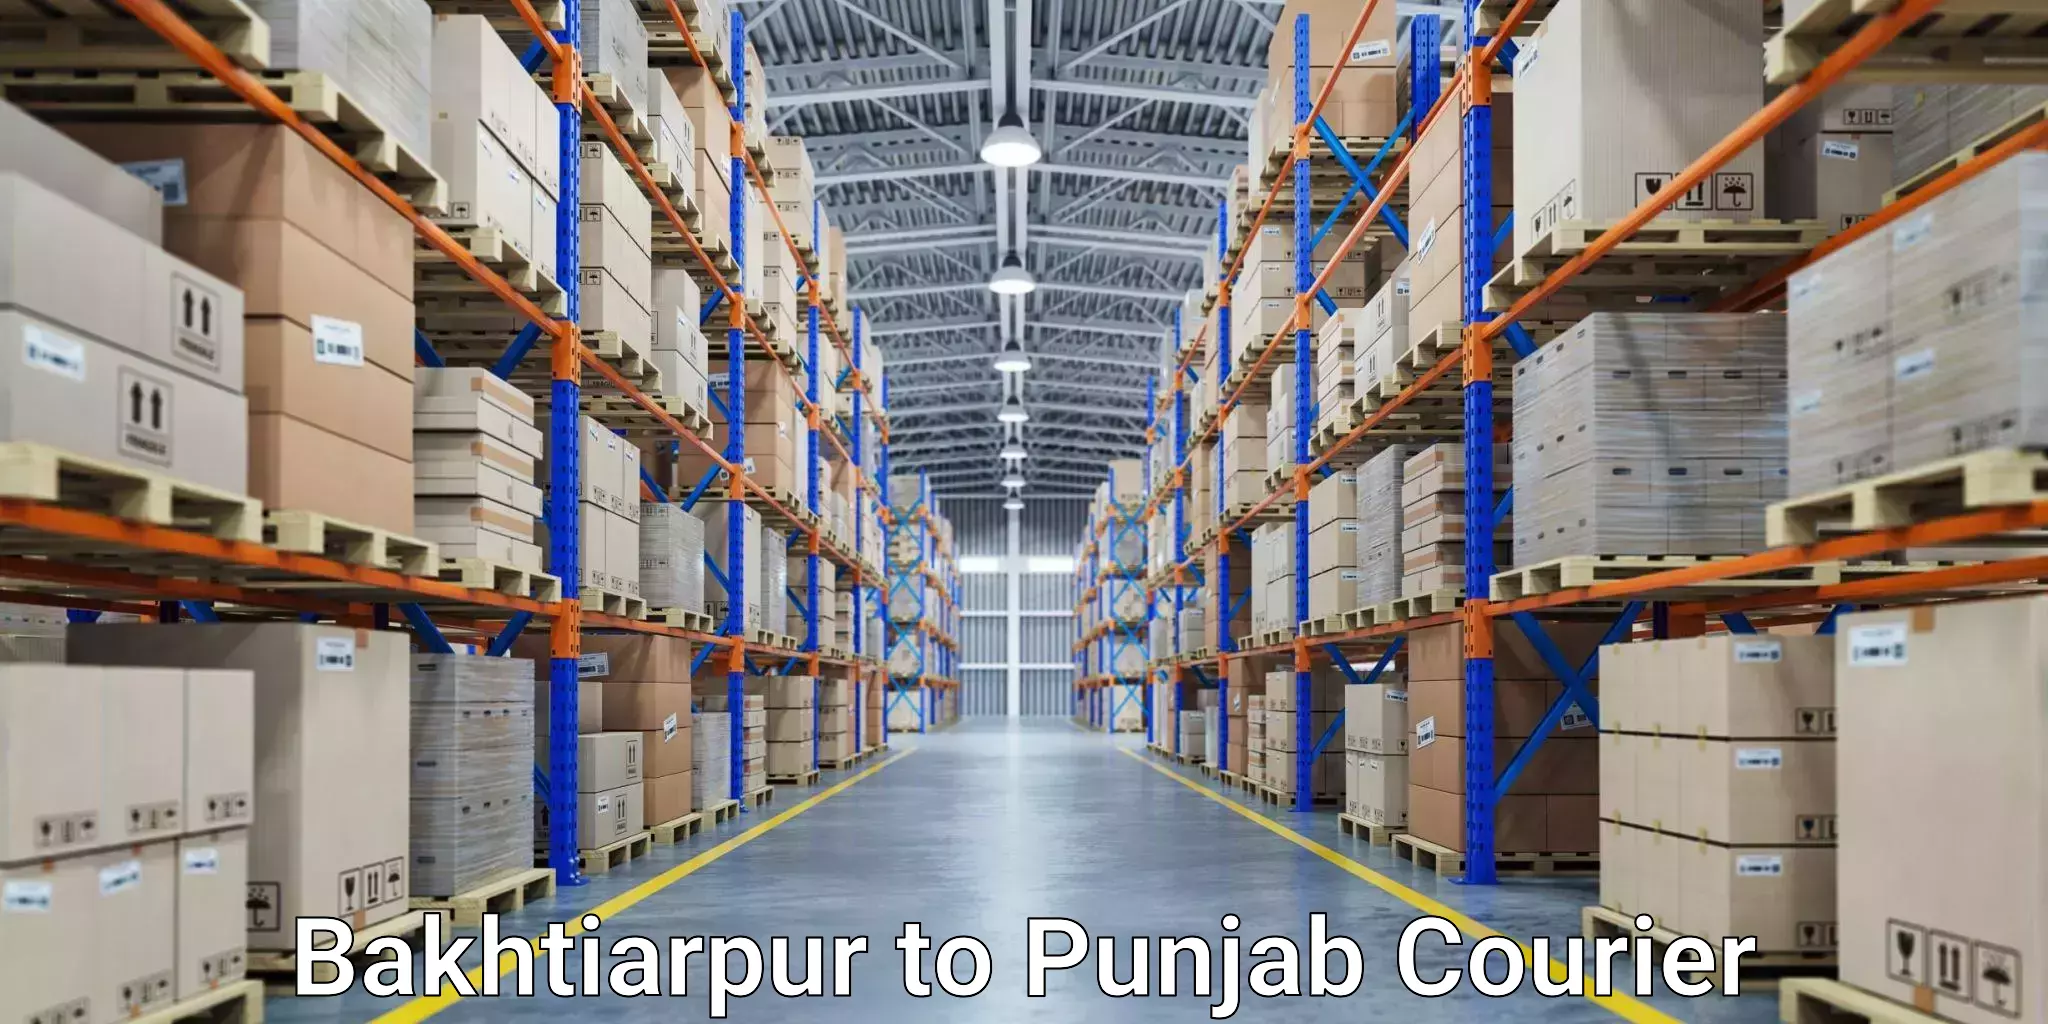 Sustainable delivery practices Bakhtiarpur to Barnala